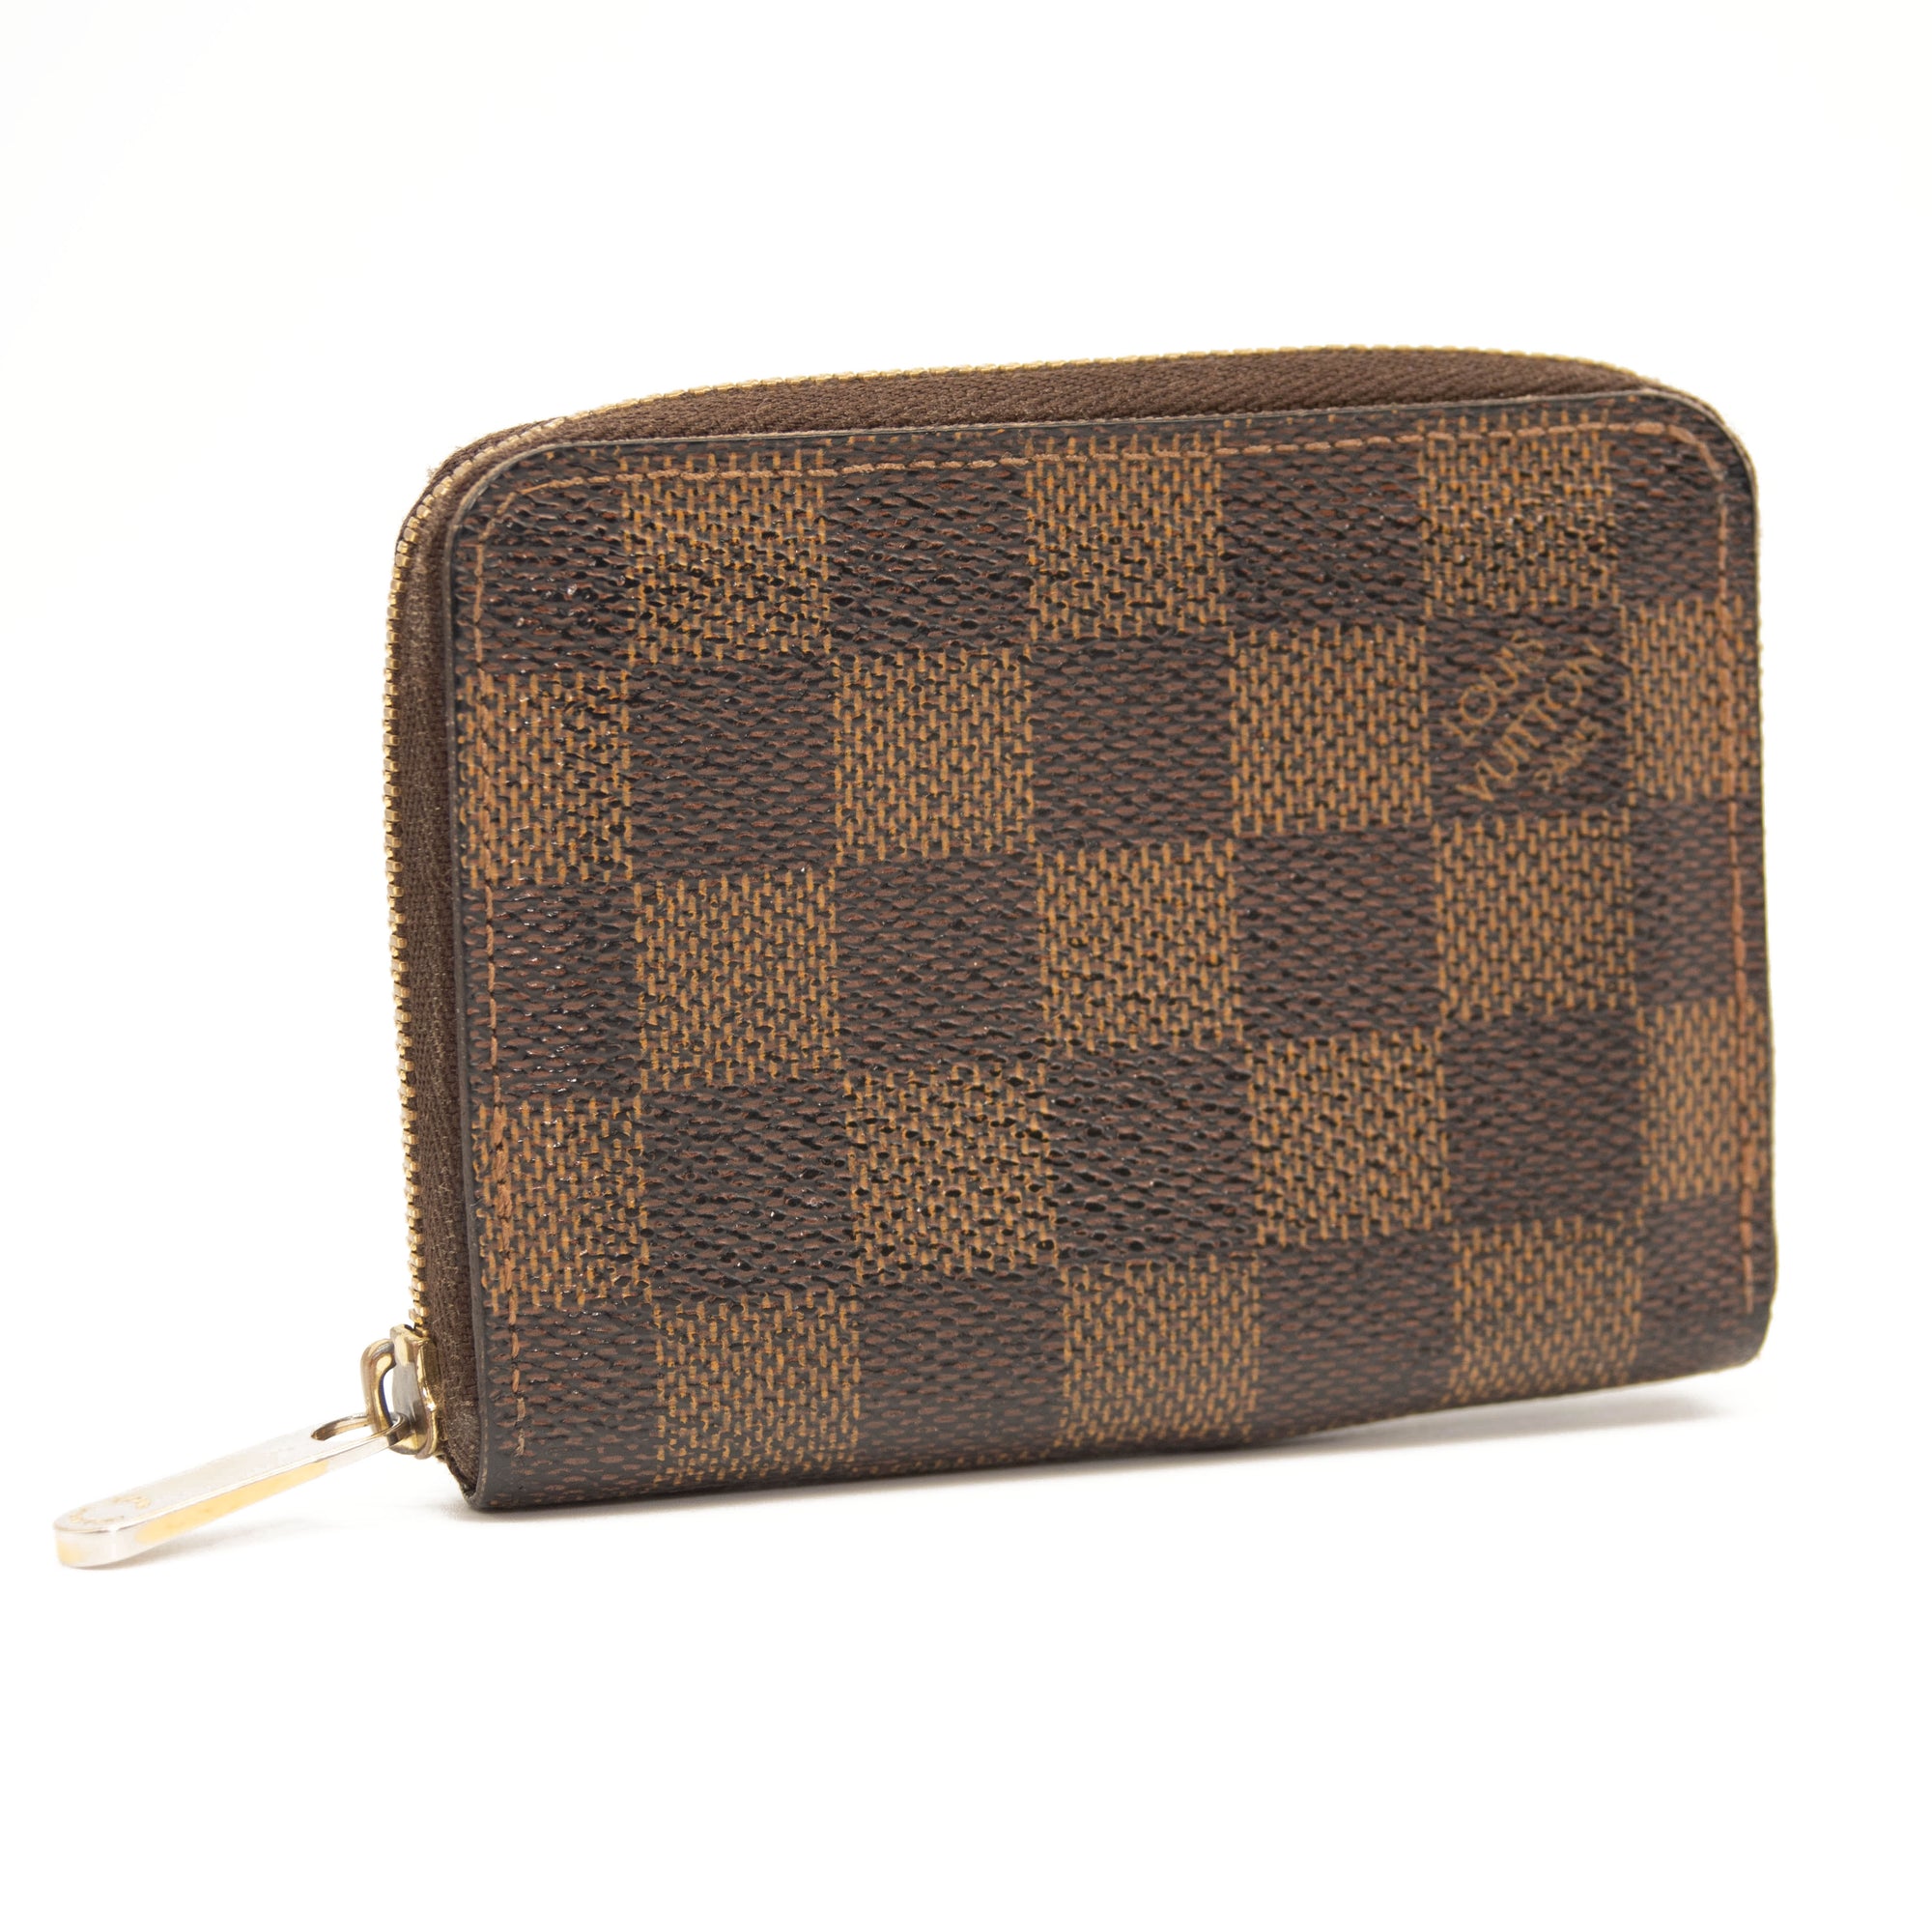 Zippy Coin Purse Damier Ebene Canvas - Wallets and Small Leather Goods